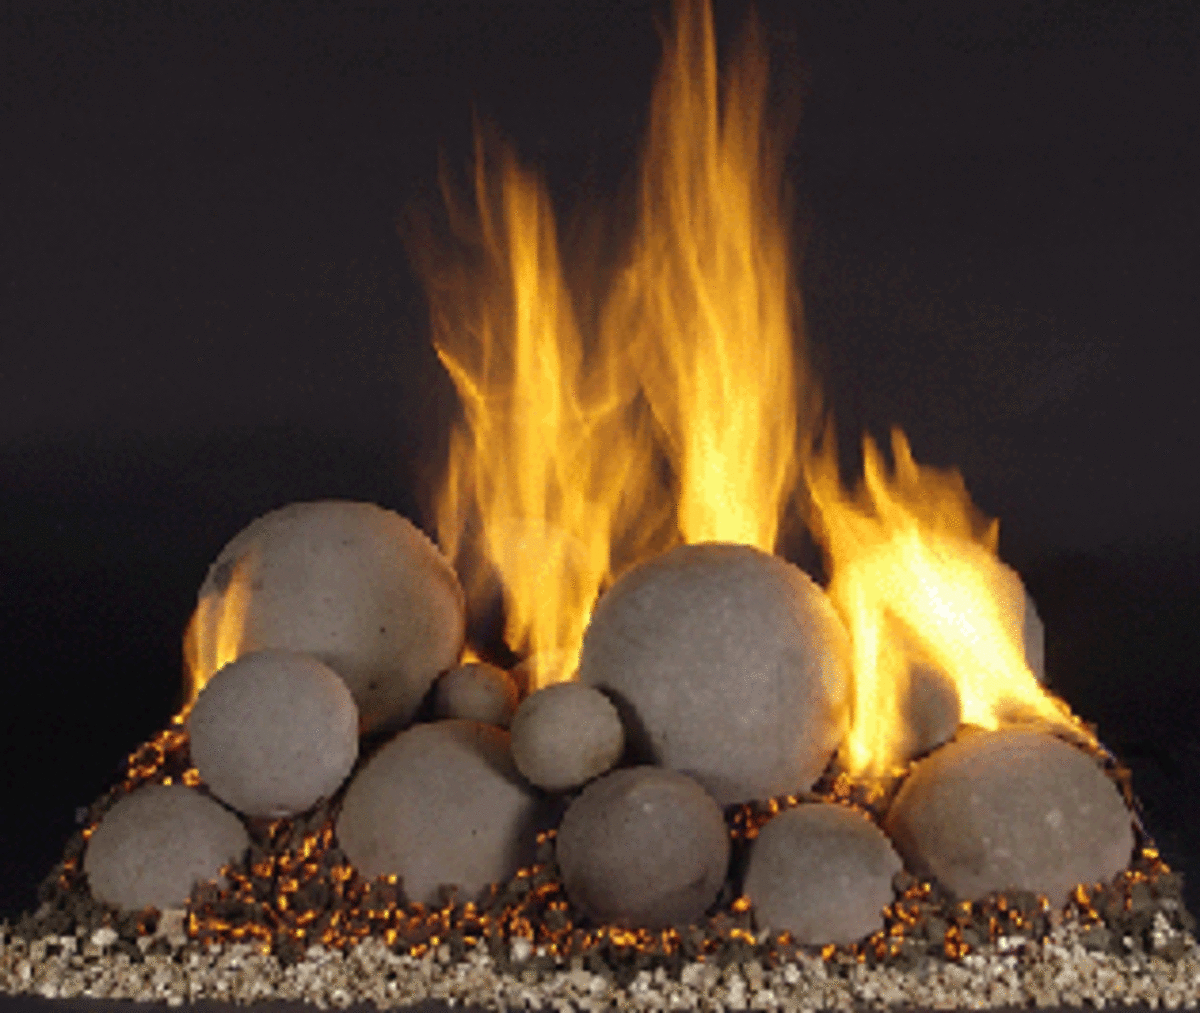 varying sizes of fire balls together in a pan burner fireplace.